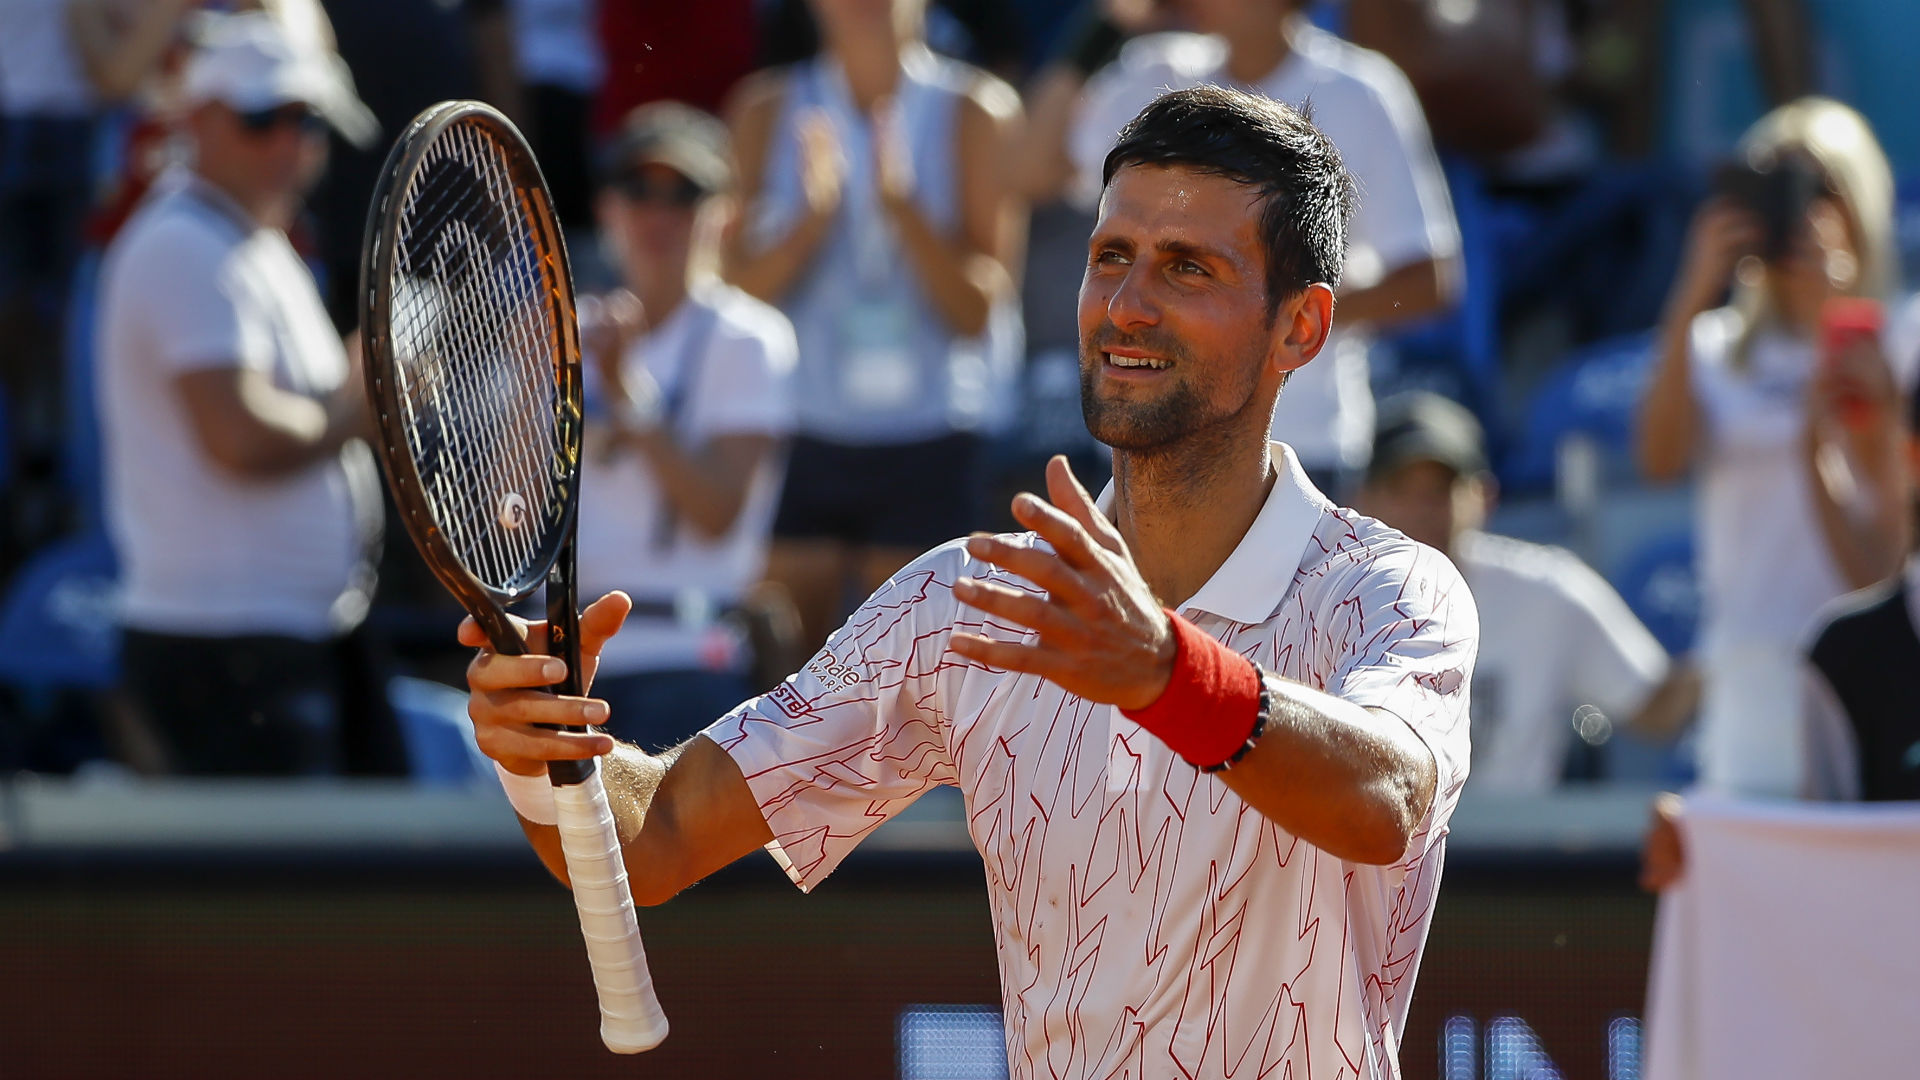 Novak Djokovic has confirmed he will travel to the United States to play at the Western and Southern Open and US Open.